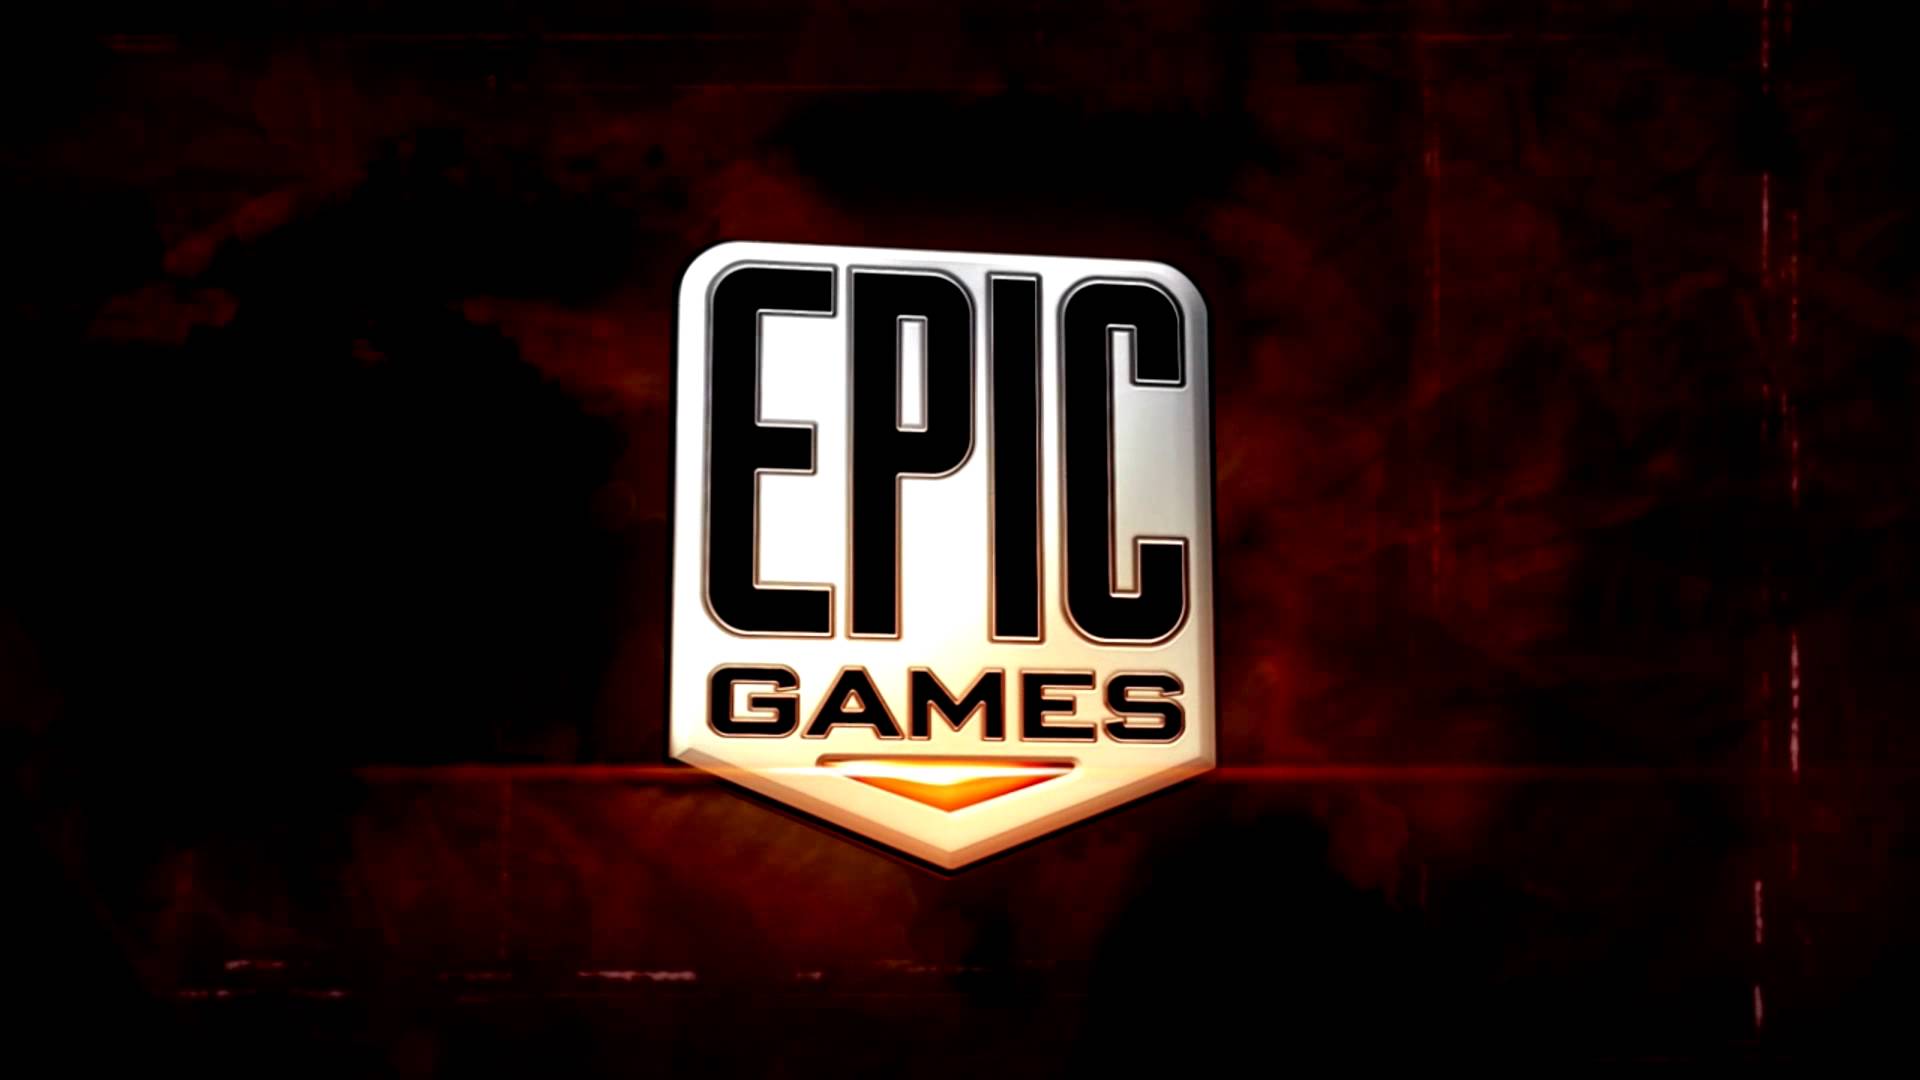 fortinite epic games download